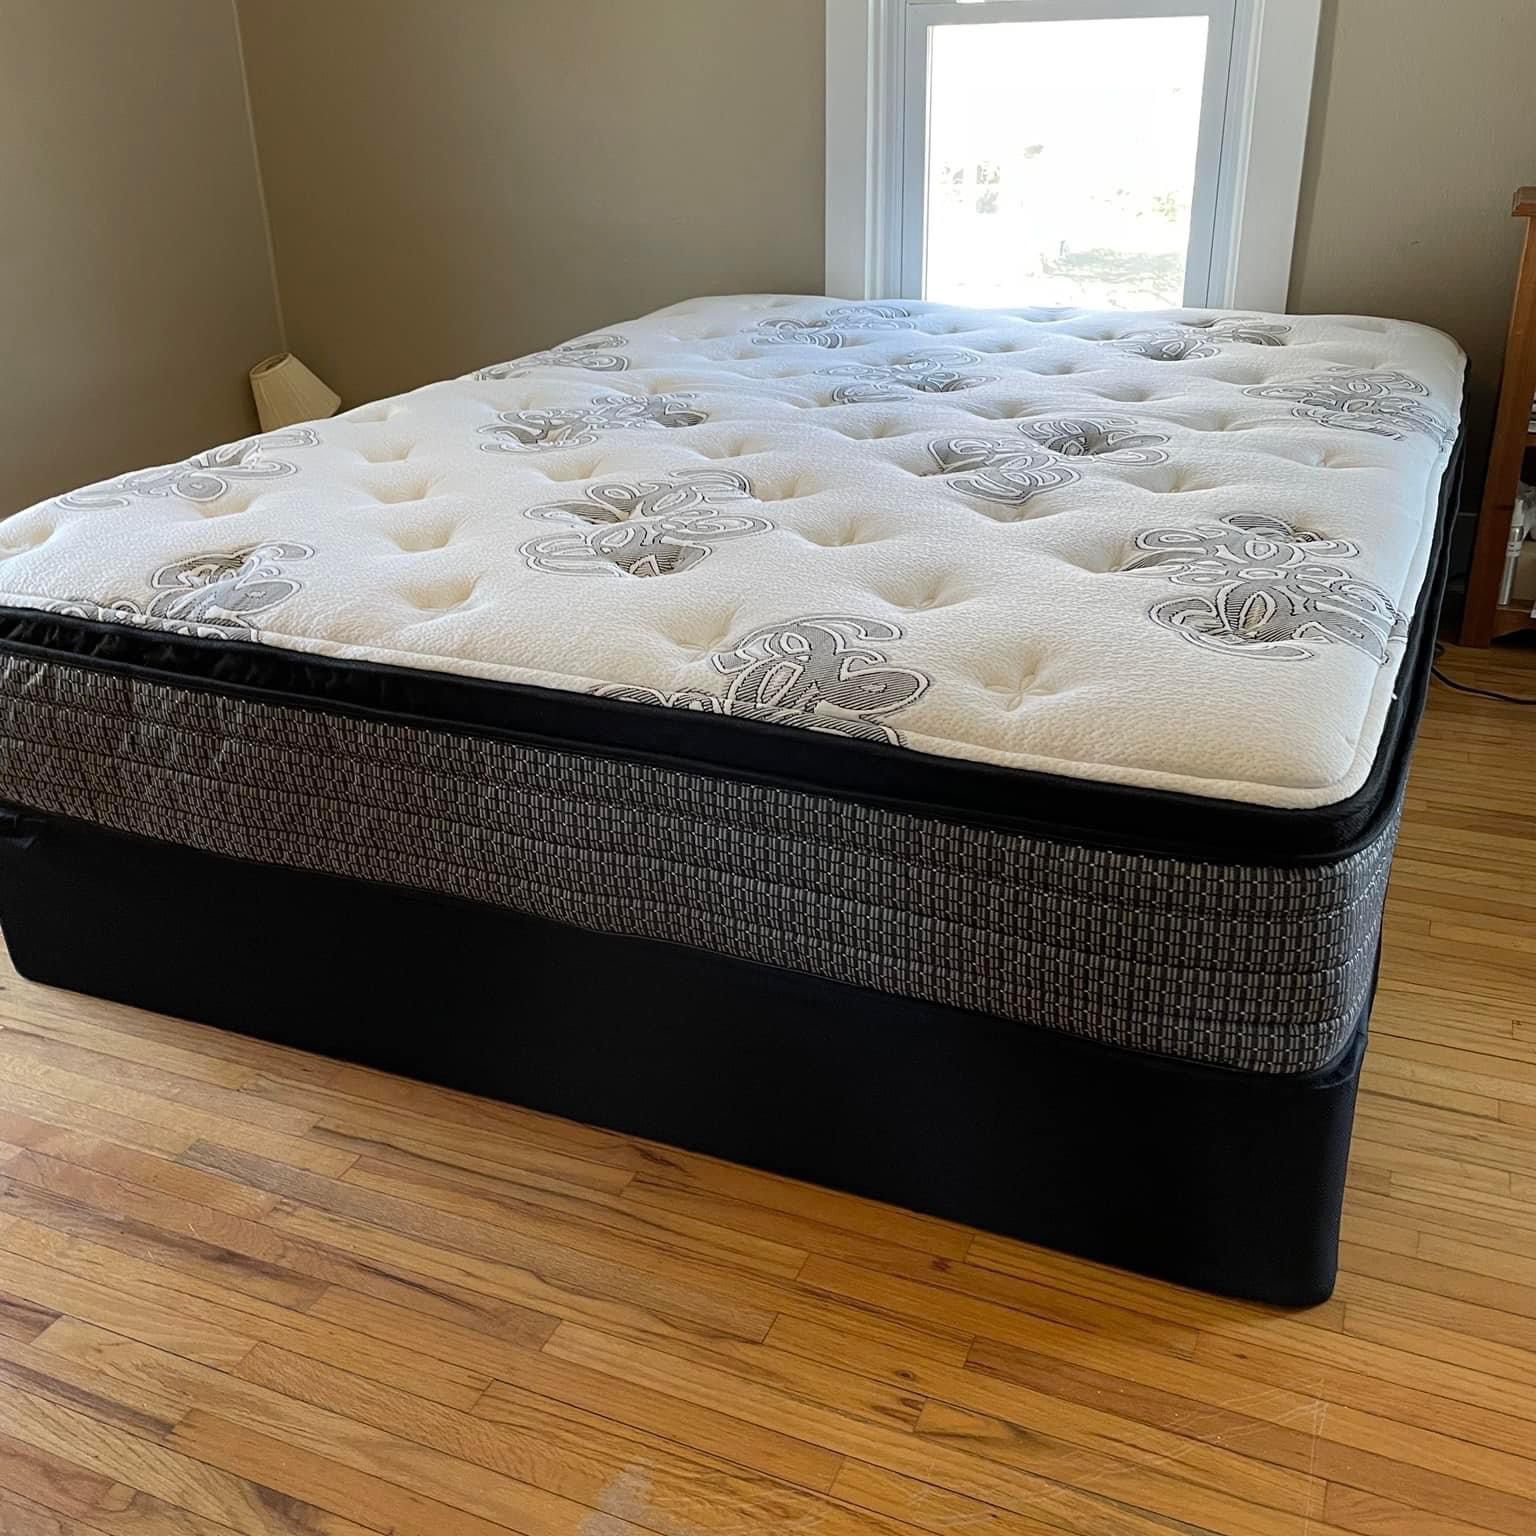 Wow!!! Fort Myers Luxury Mattress Sets 50-80% Off big retail!! Limited Selection Kings / Queens